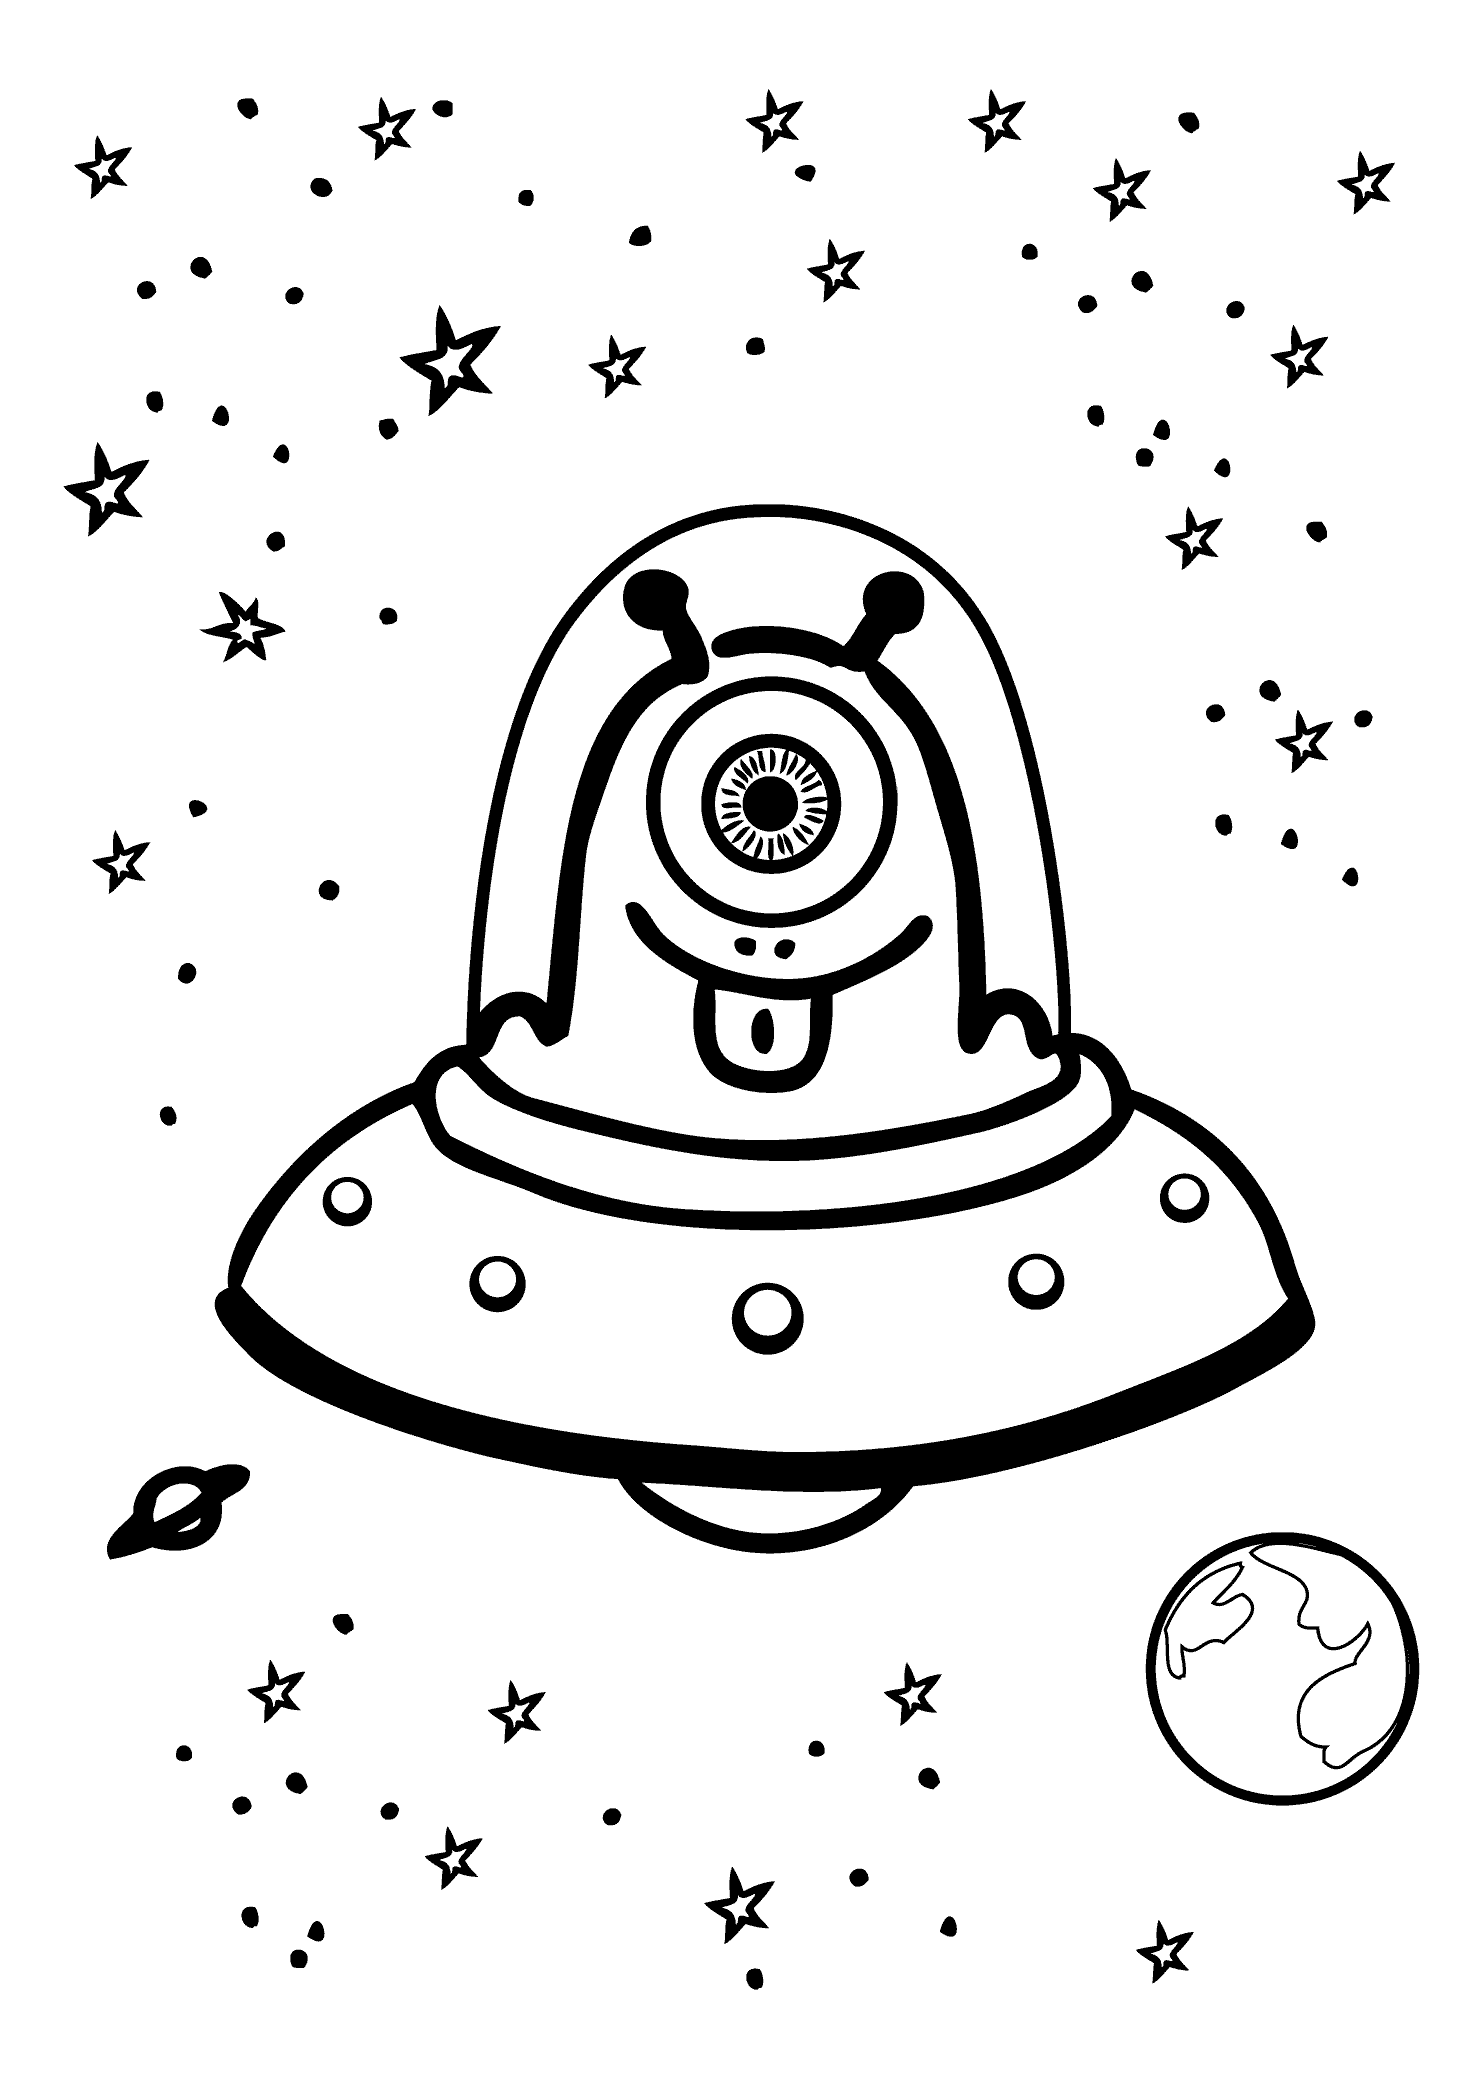 Funny alien in UFO – Coloring page for kids